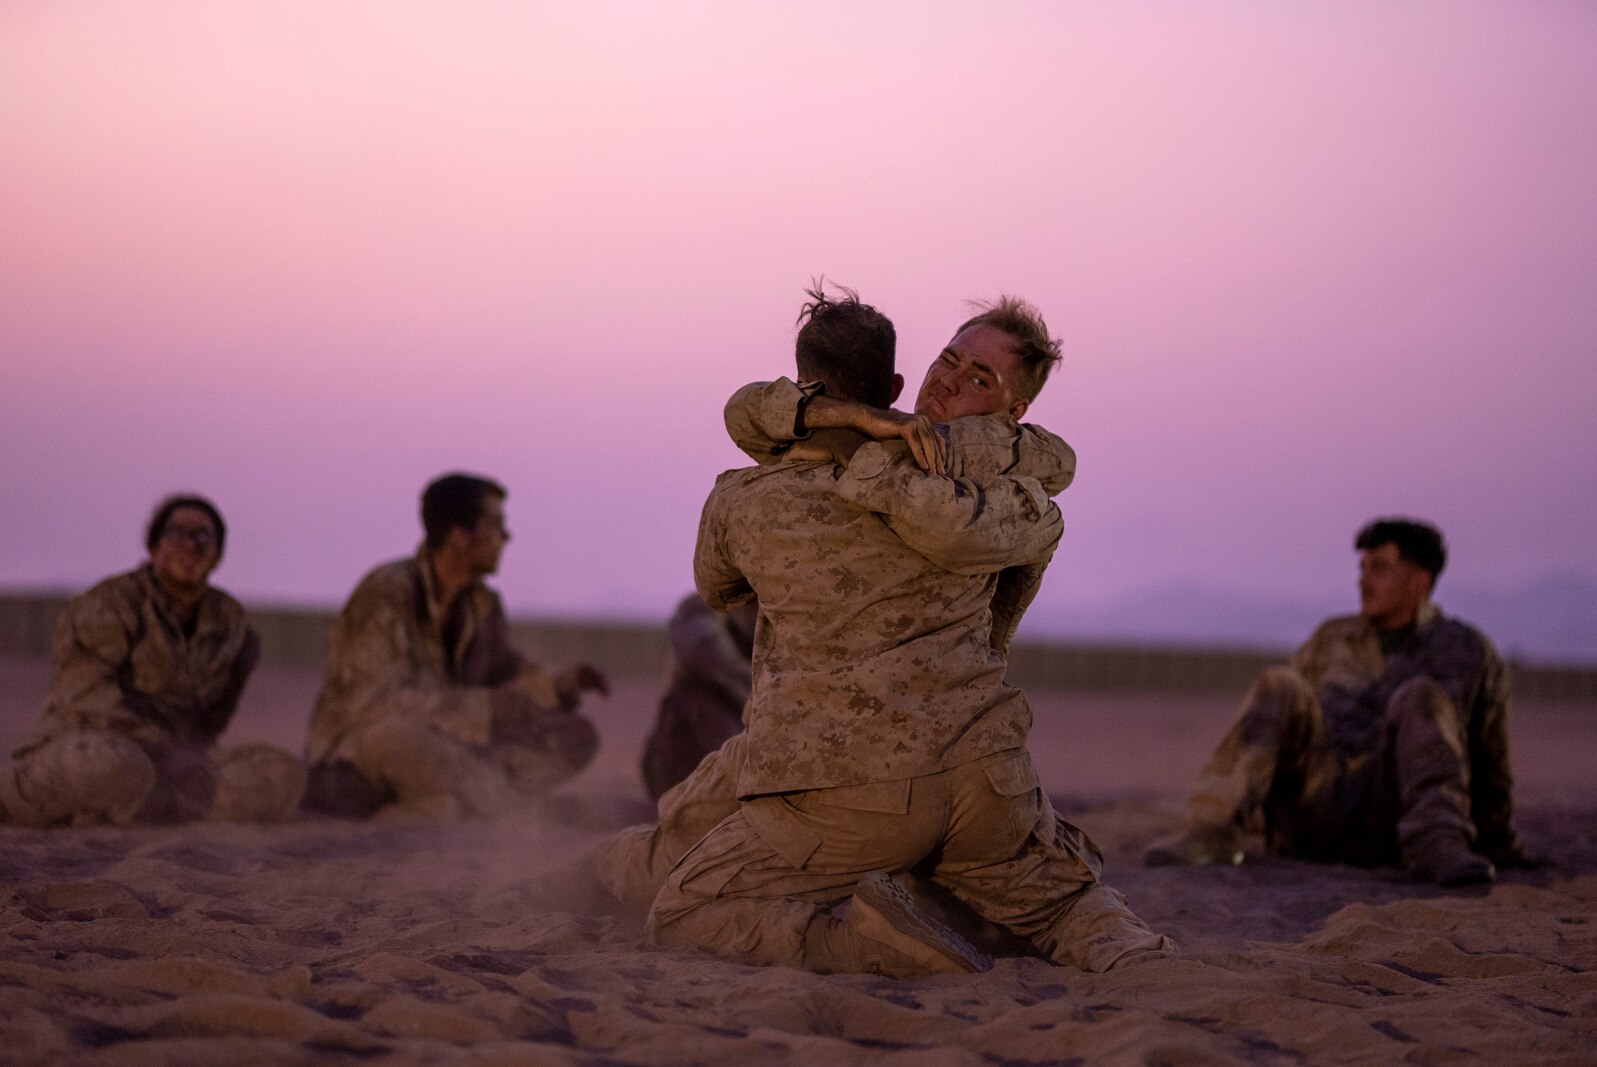 U.S. Marine Corps 2nd Lt. Arthur Deal, left, a Communication Strategy and Operations officer, and Sgt. Joshua McDaniel, right, a ground radio technician, both with Combat Logistics Regiment 1, 1st Marine Logistics Group, grapple during Marine Corps martial arts belt advancement training at a Logistics Support Area established in the Kingdom of Saudi Arabia during exercise Native Fury 22